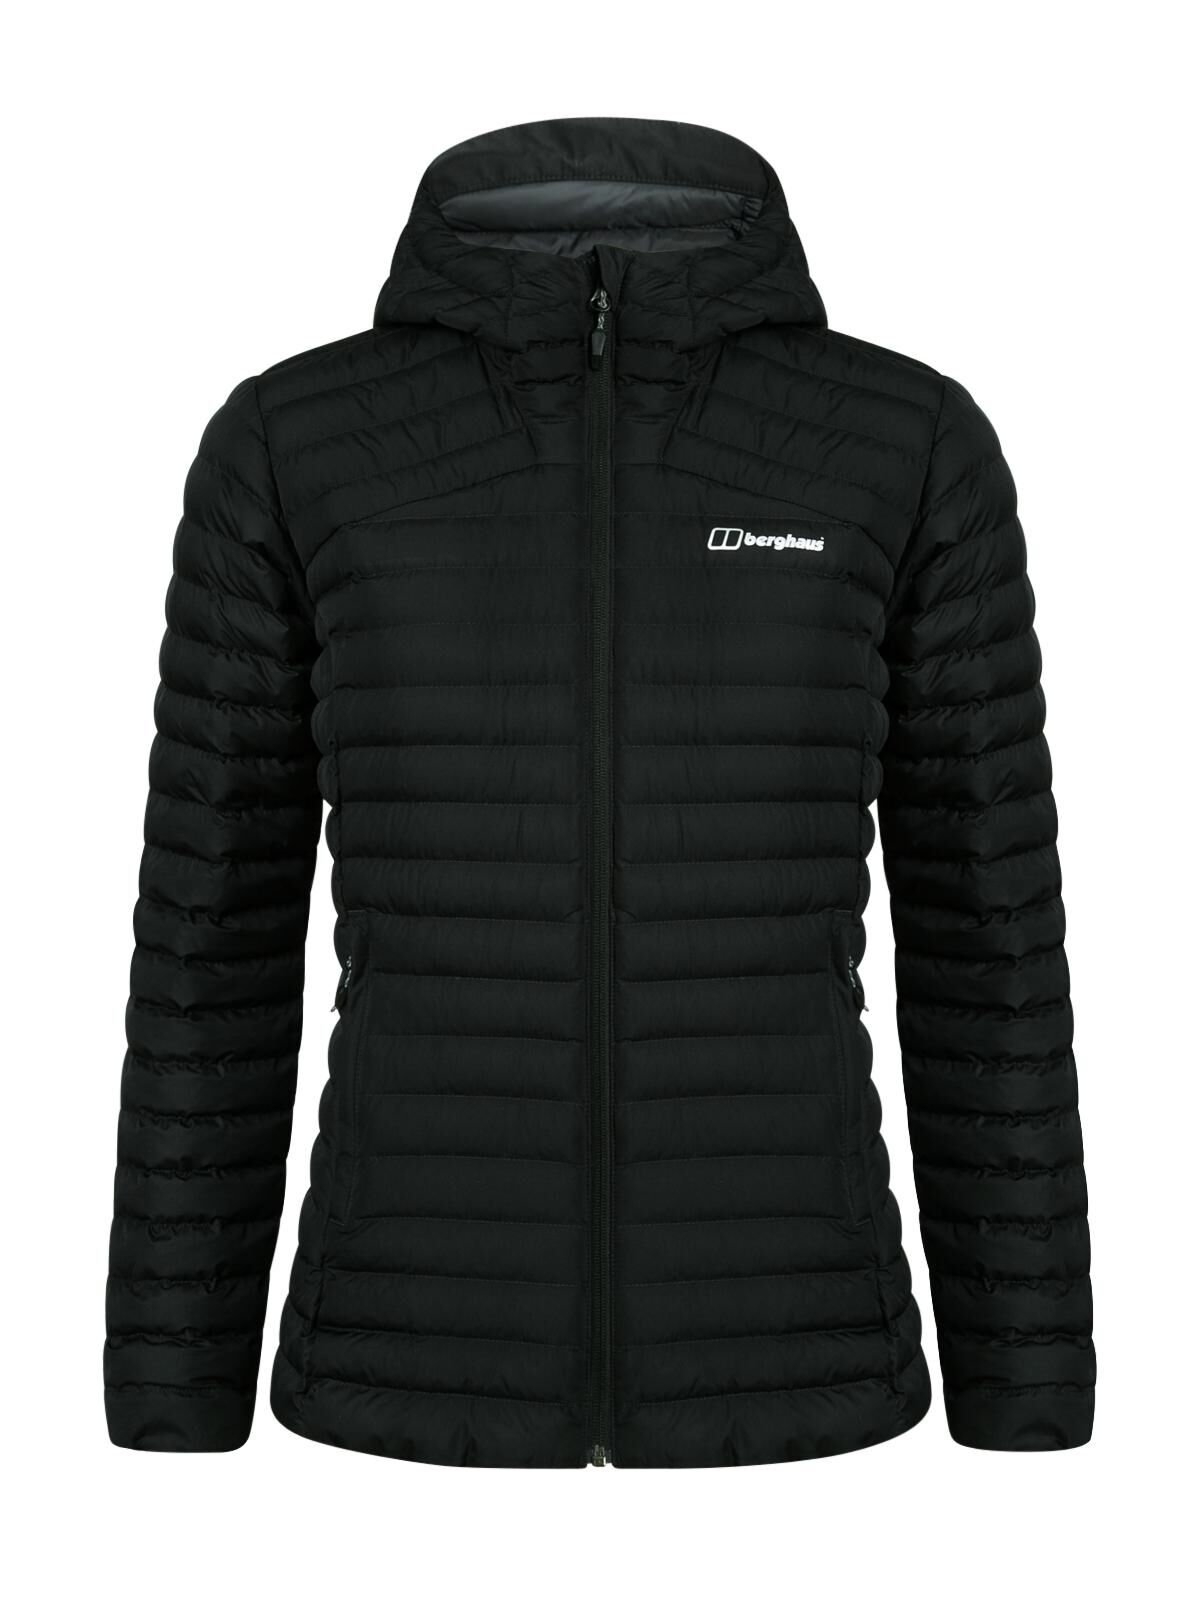 Berghaus Nula Micro Insulated Jacket - Giacca sintetica - Donna